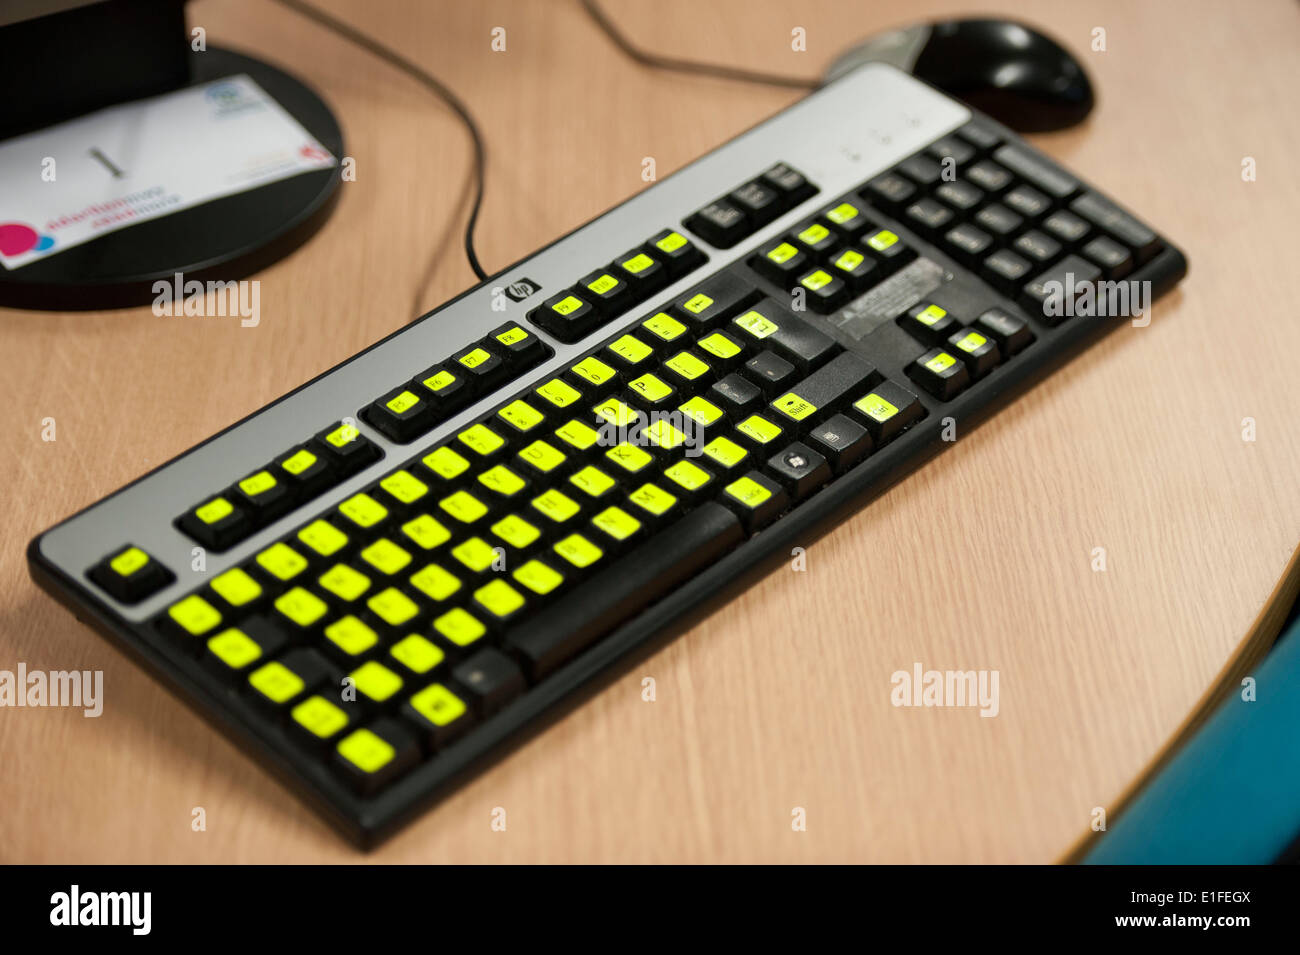 Computer keyboard with highlighted keys to aid visually impaired people. Stock Photo